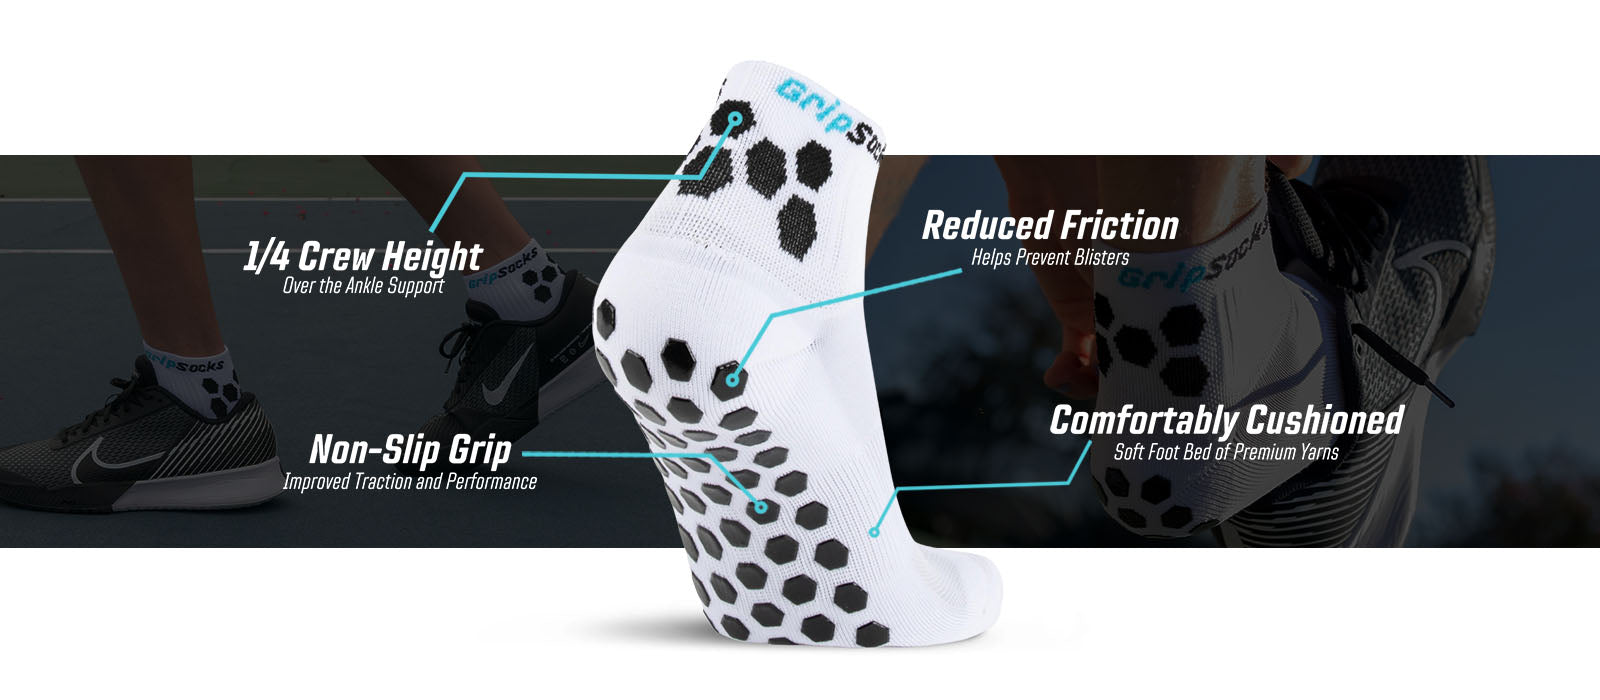 Grip Socks Offer Better Traction and Reduced Friction